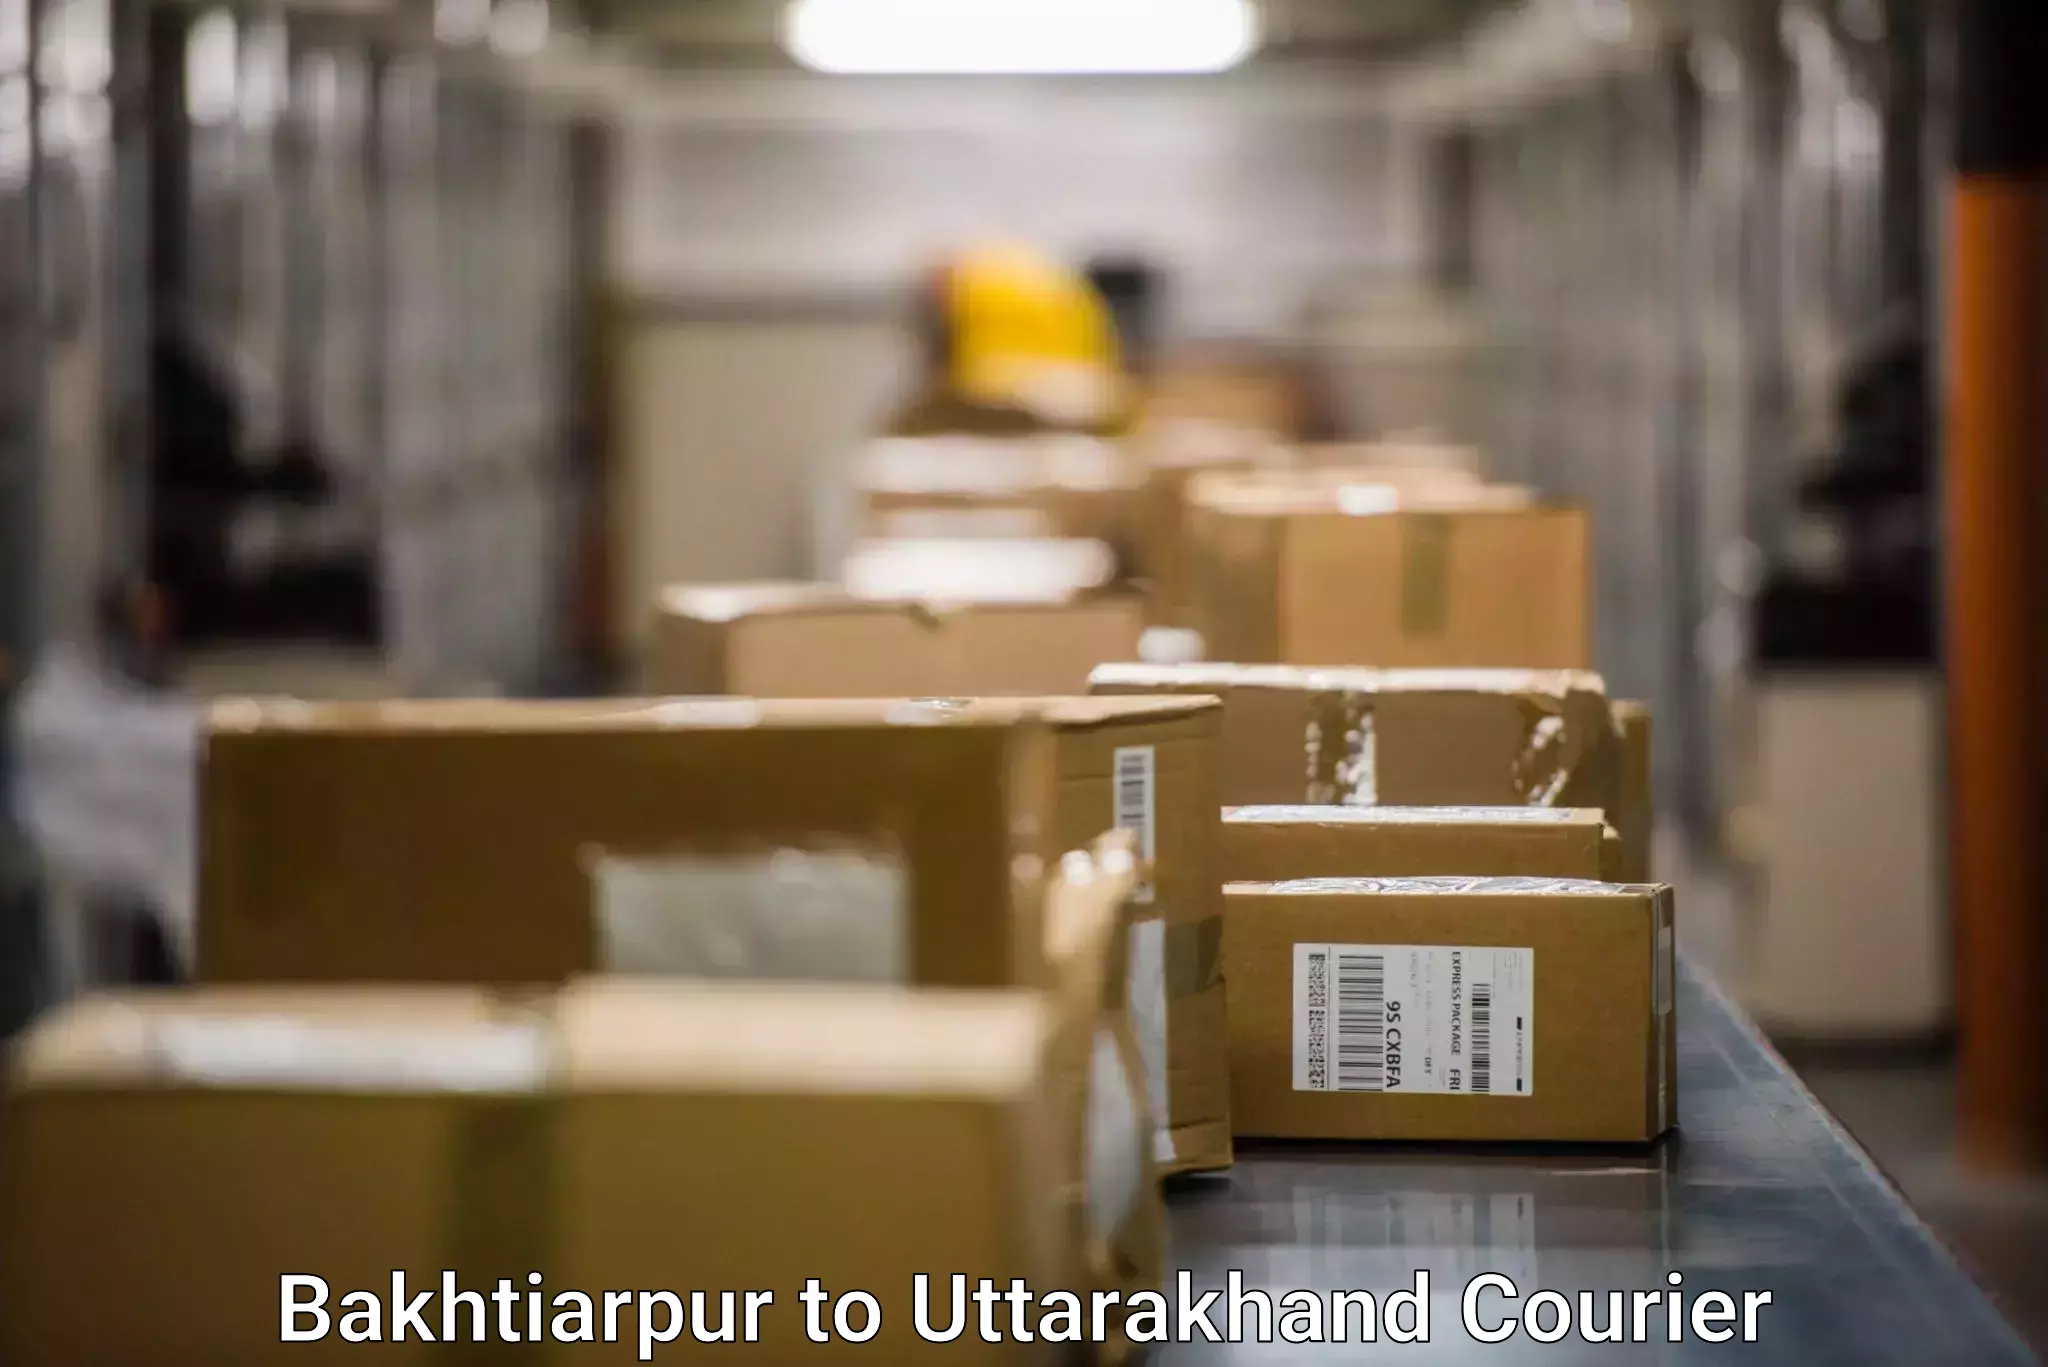 On-demand shipping options Bakhtiarpur to Mussoorie